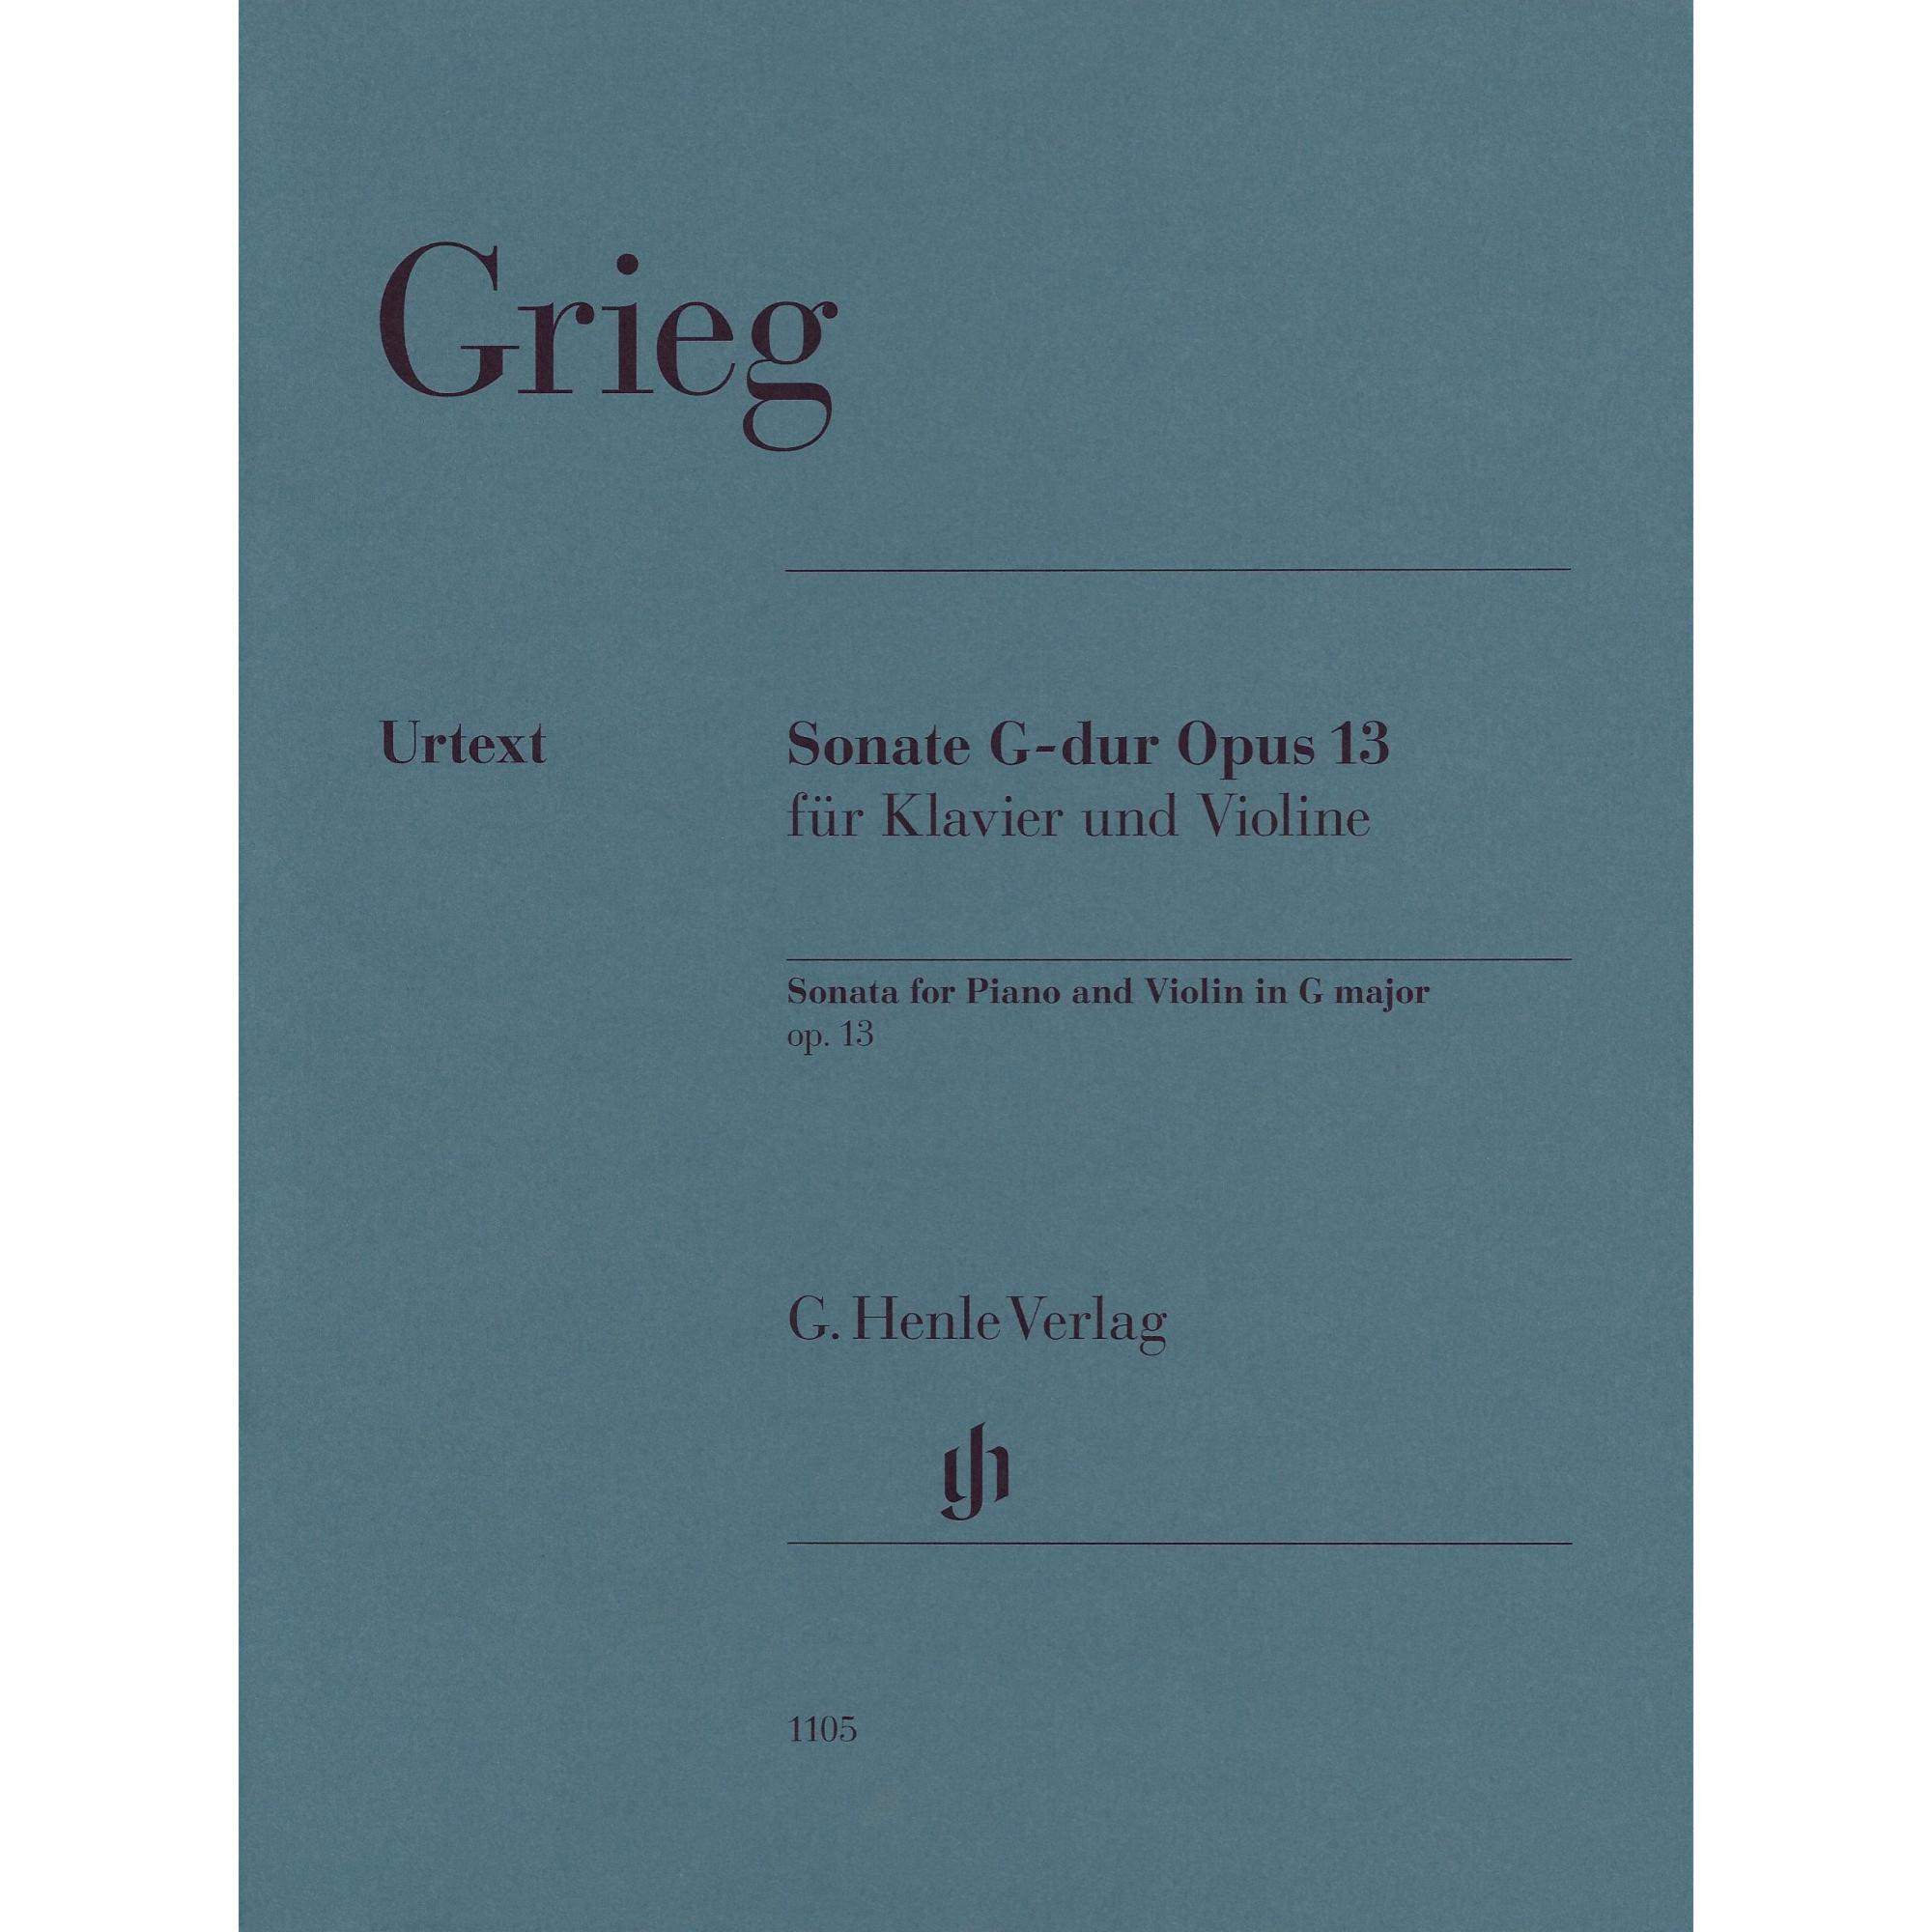 Grieg -- Sonata in G Major, Op. 13 for Violin and Piano